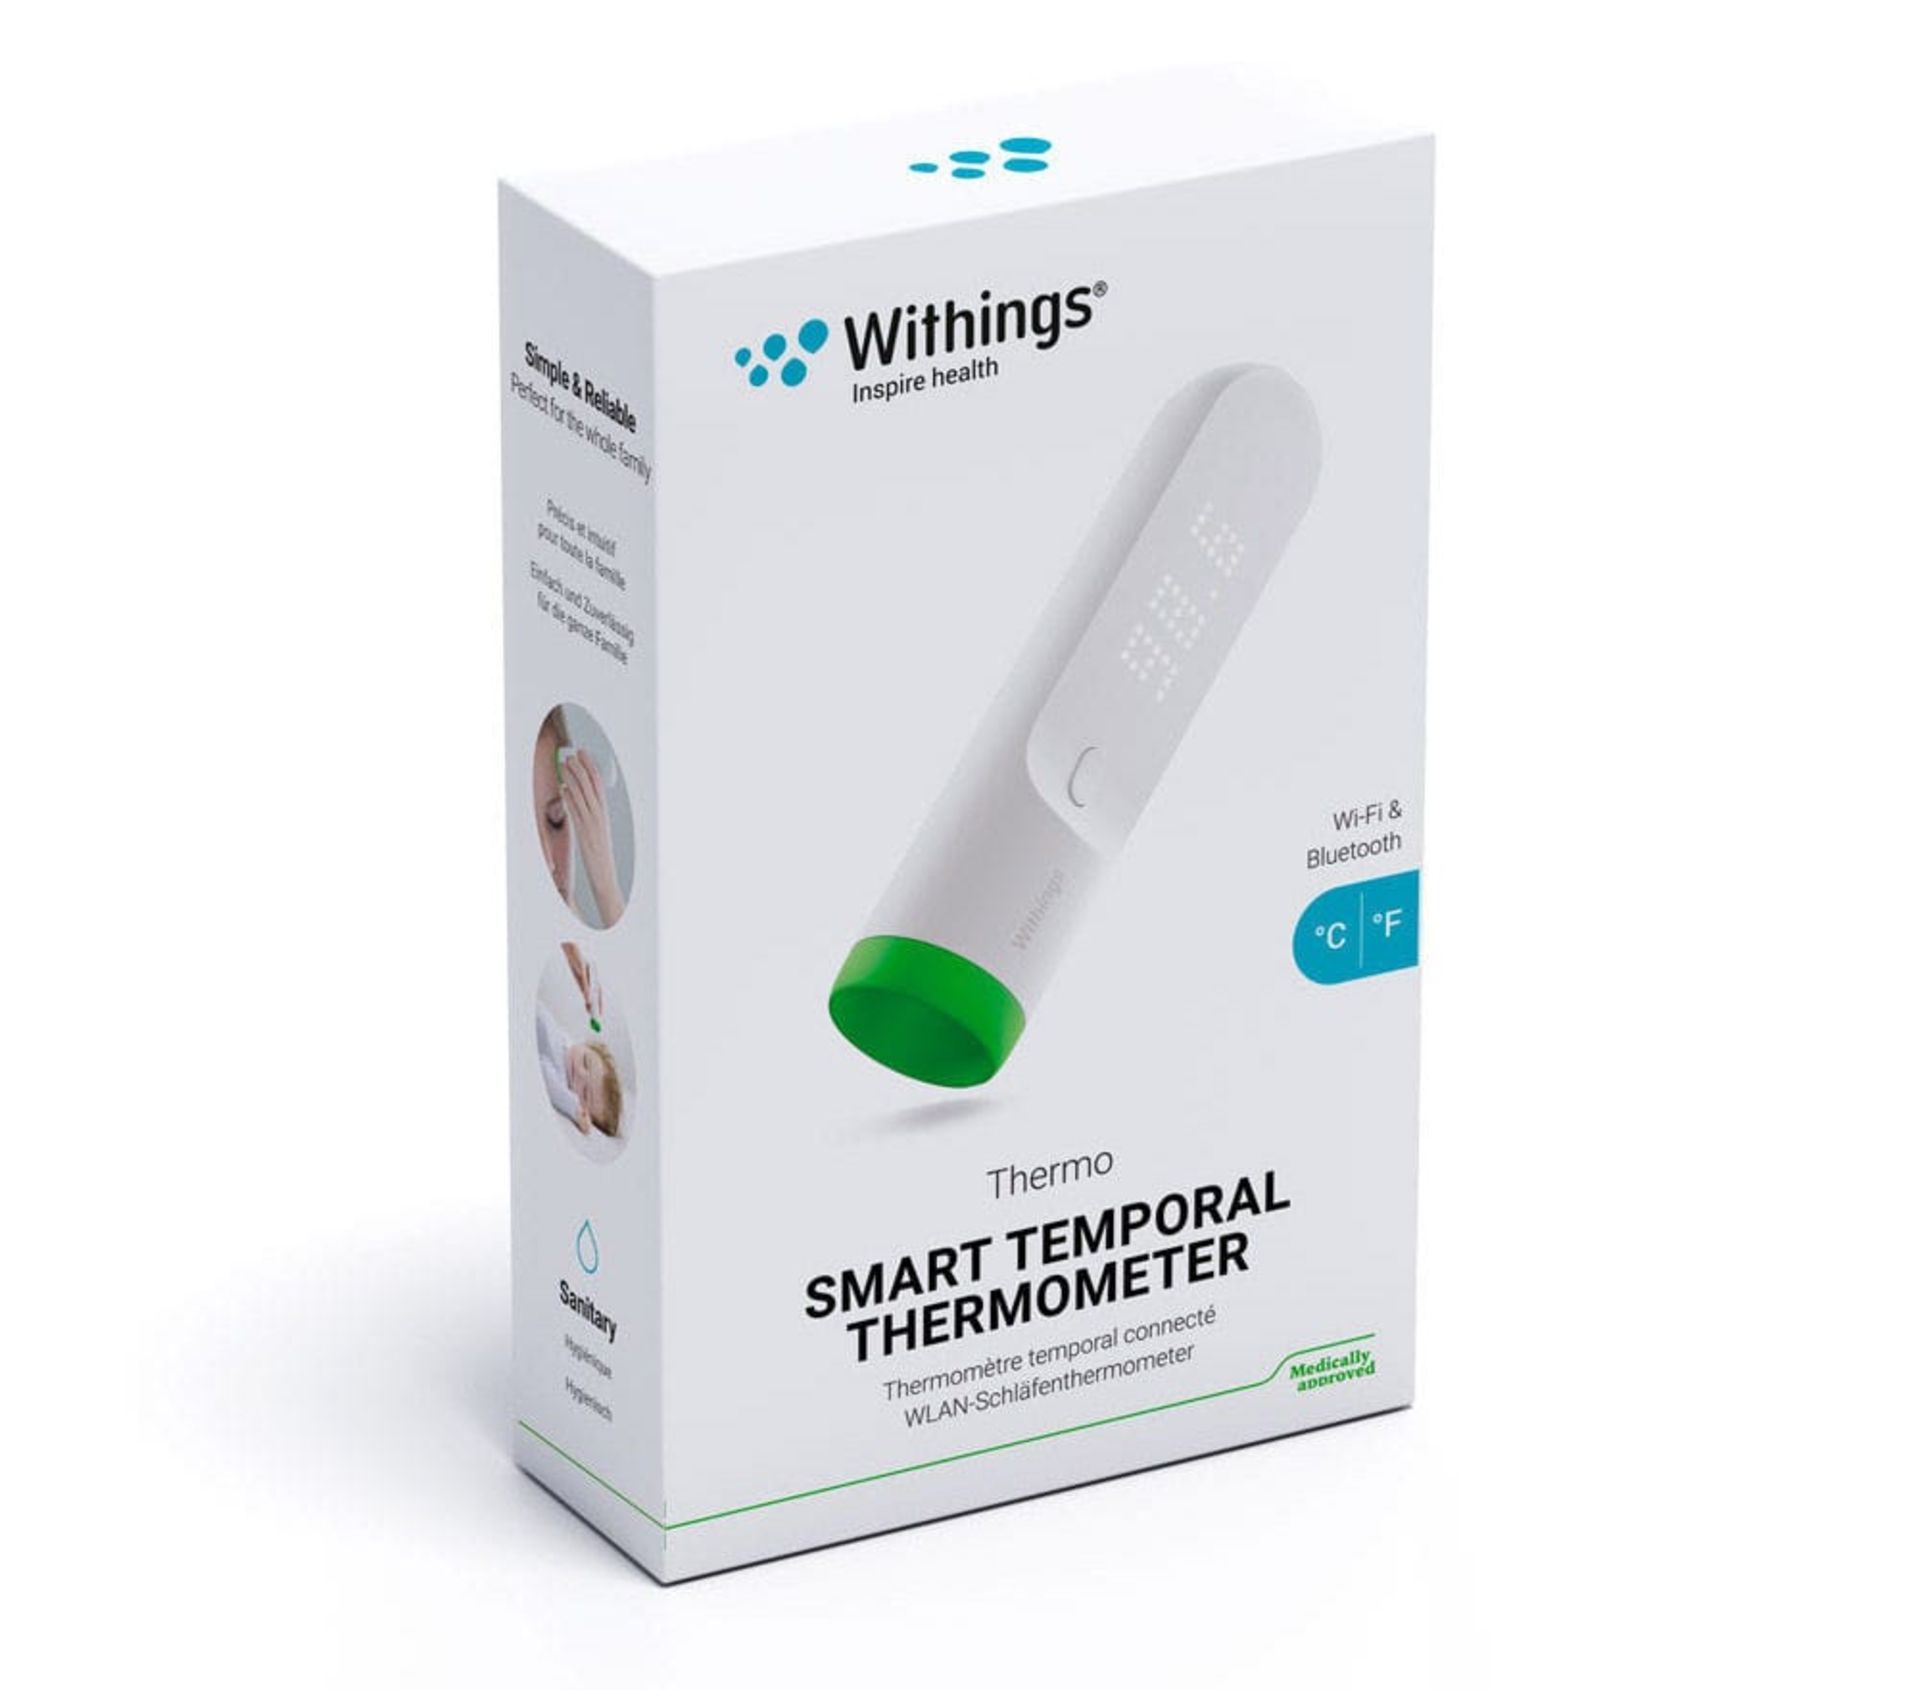 2 X BRAND NEW WITHINGS THERMO SMART TEMPORAL THERMOMETERS RRP £119 EACH R9.7